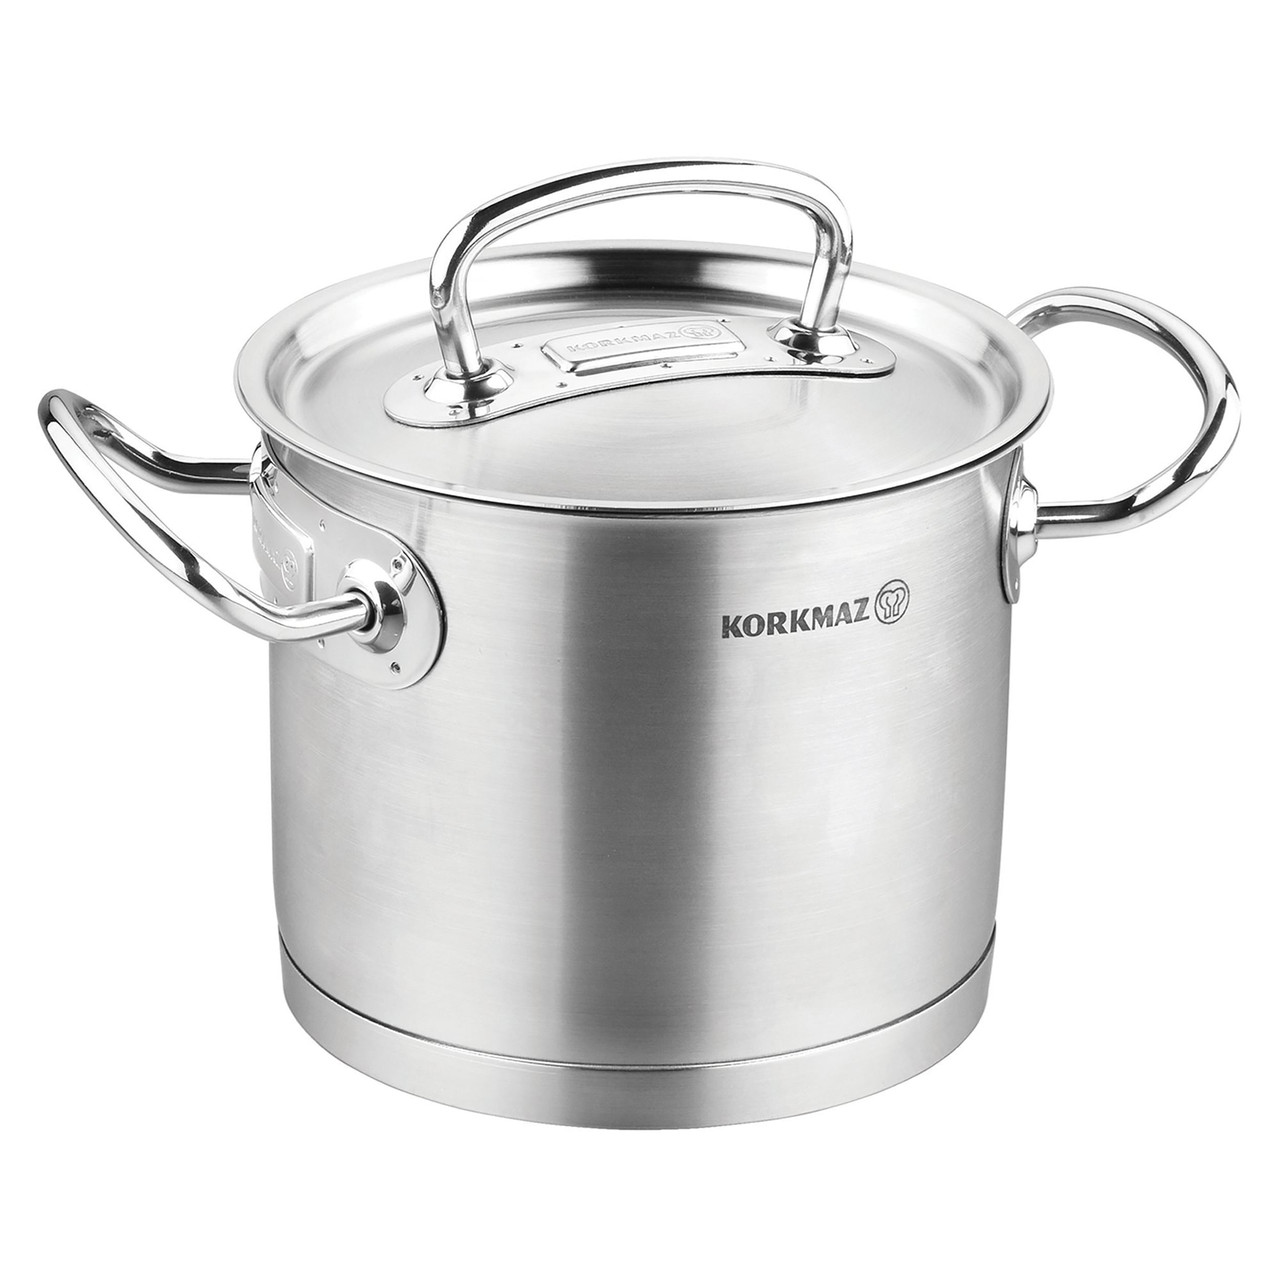 Korkmaz Proline Professional Series 4.8 Liter Stainless Steel Extra Deep Casserole with Lid in Silv